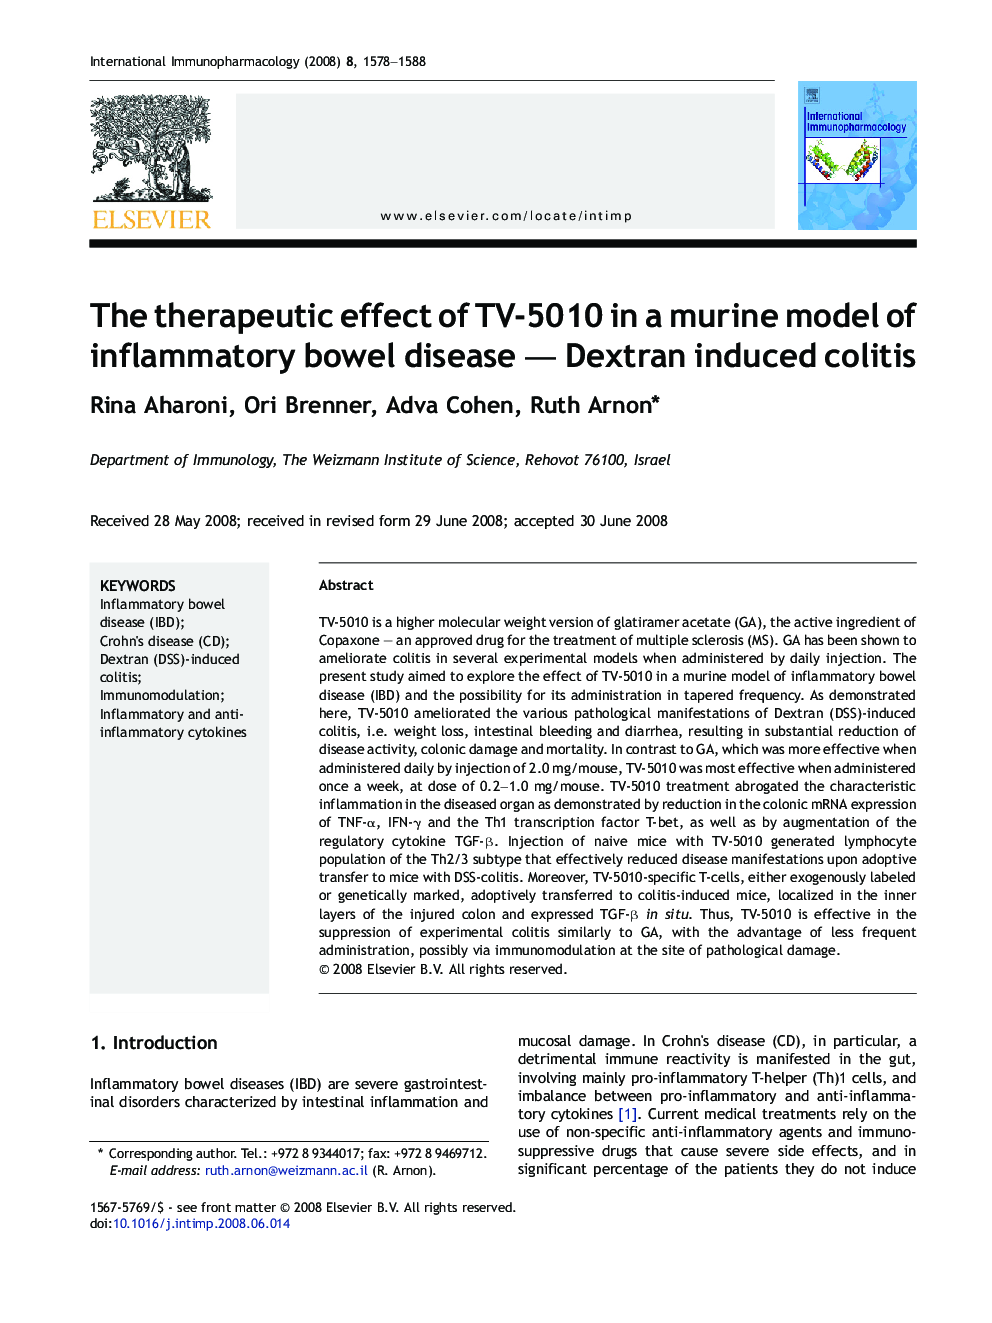 The therapeutic effect of TV-5010 in a murine model of inflammatory bowel disease - Dextran induced colitis